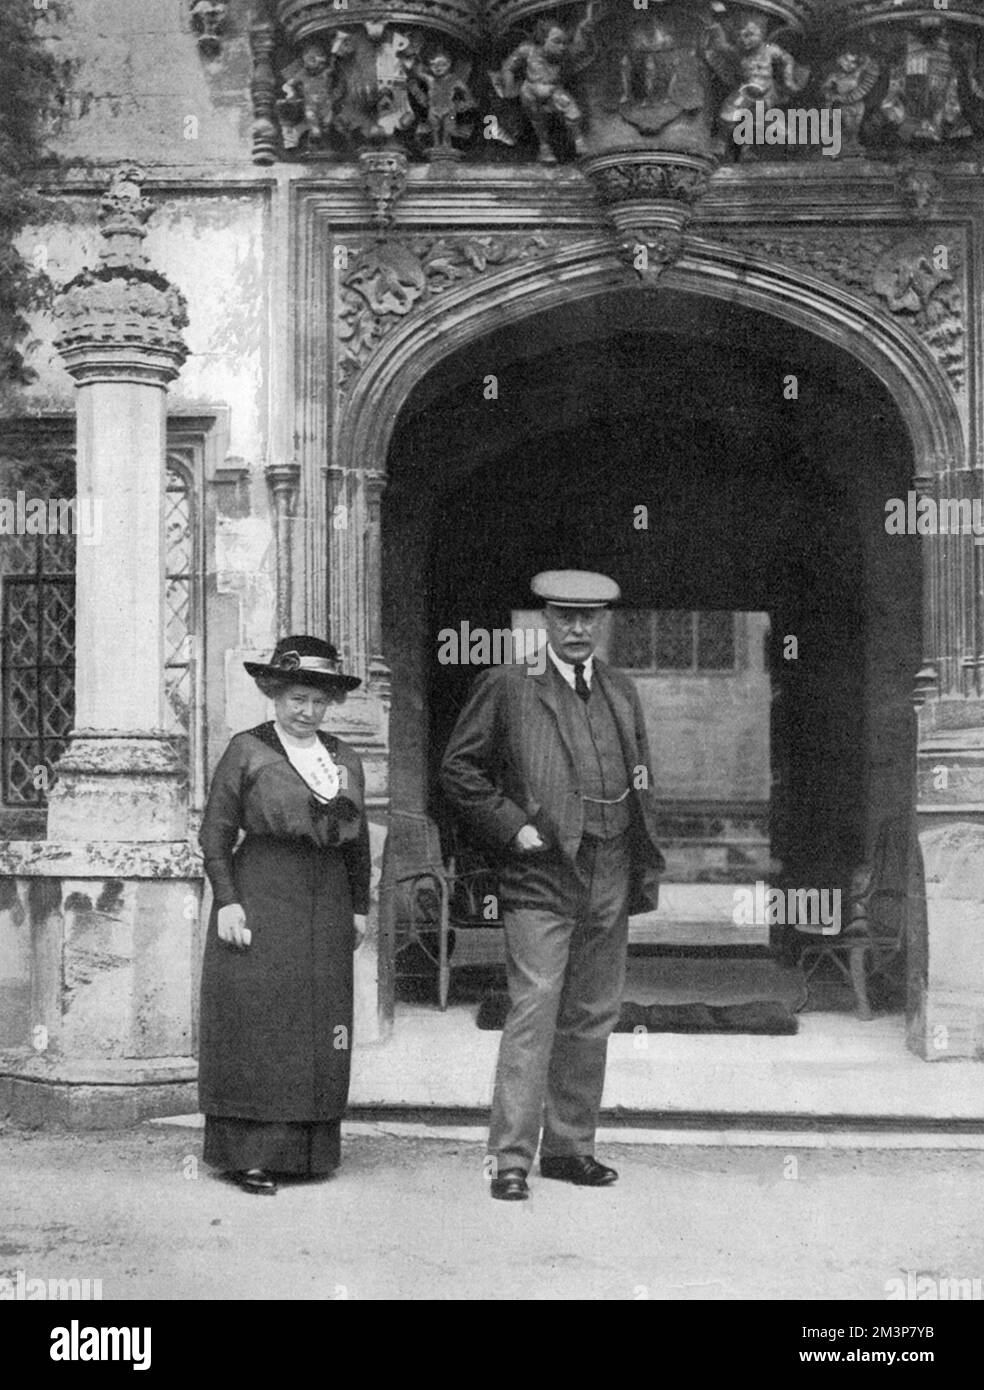 Lieutenant Colonel and the Hon. Mrs Wood outside the wonderful porch of Hengrave Hall, near Bury St. Edmunds in Suffolk.  The hall was converted into a complete hospital for wounded soldiers.  As The Tatler says, 'Situated in one of the most beautiful parts of the country...Hengrave Hall lends itself admirably to the purpose of convalescence.'     Date: 1914 Stock Photo